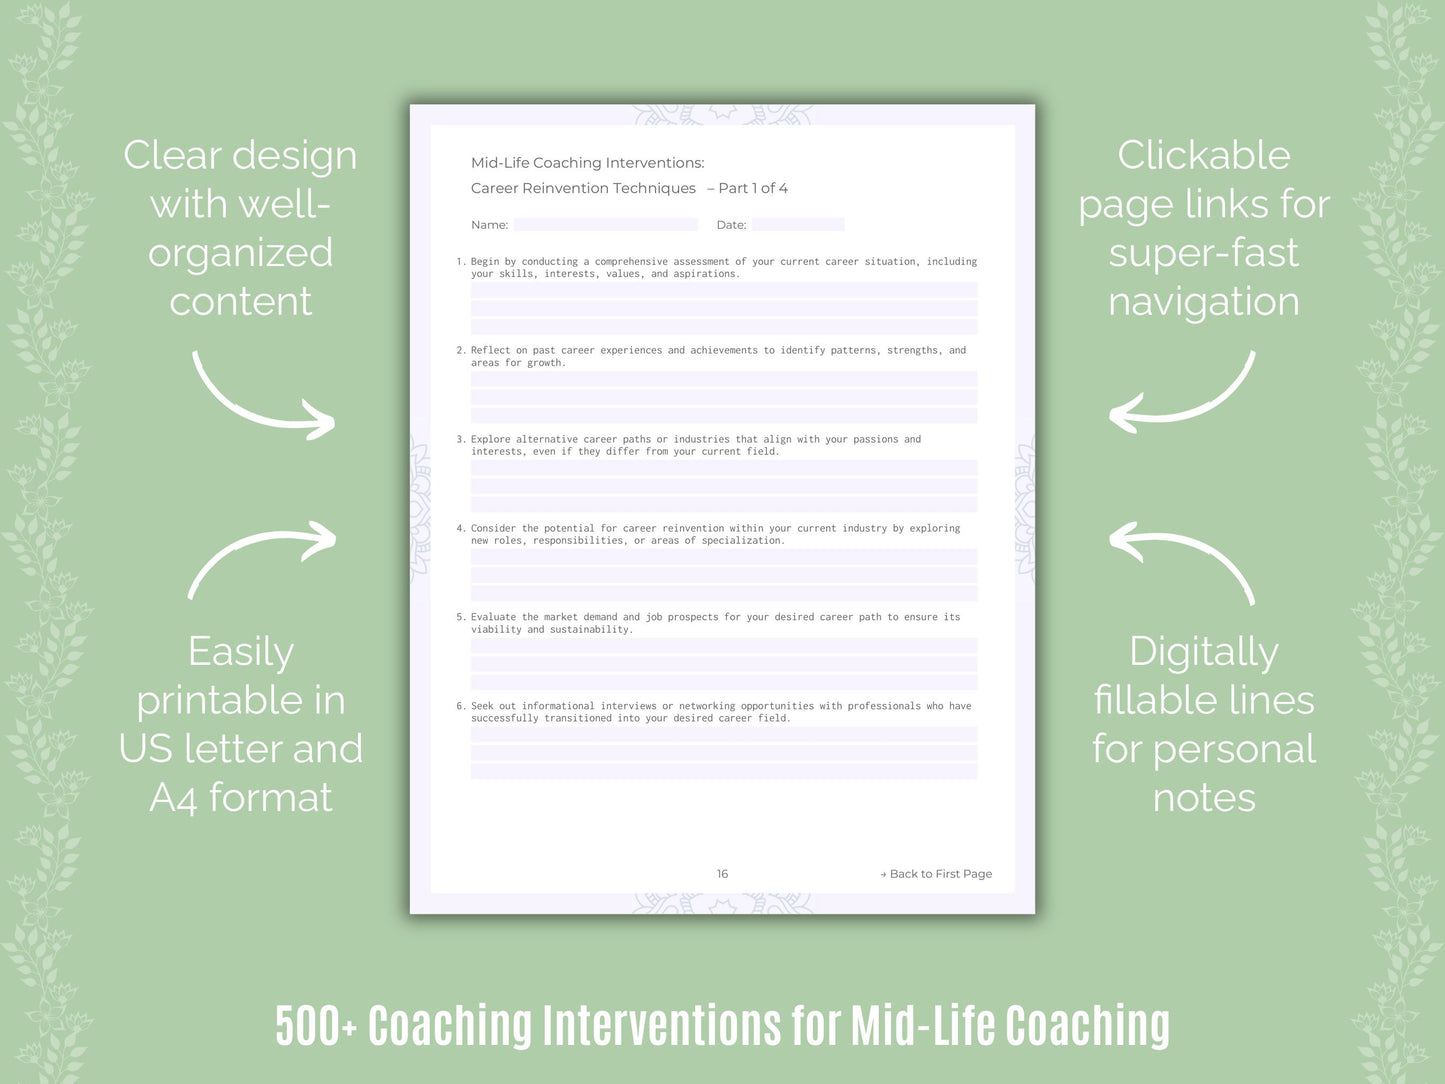 Mid-Life Coaching Interventions